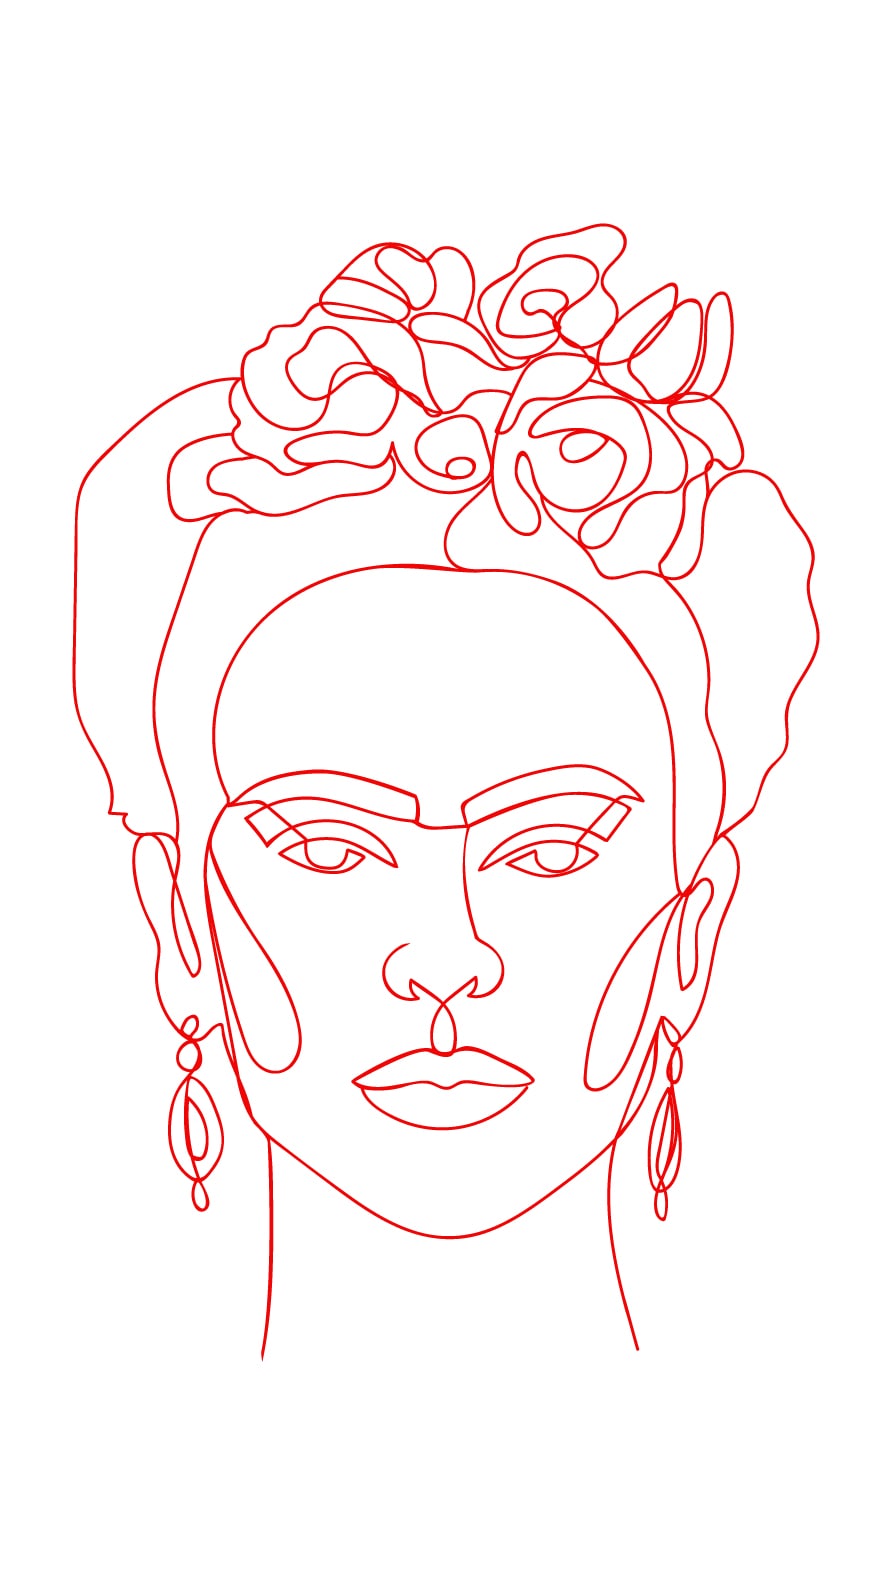 iPhone wallpapers featuring Frida Kahlo